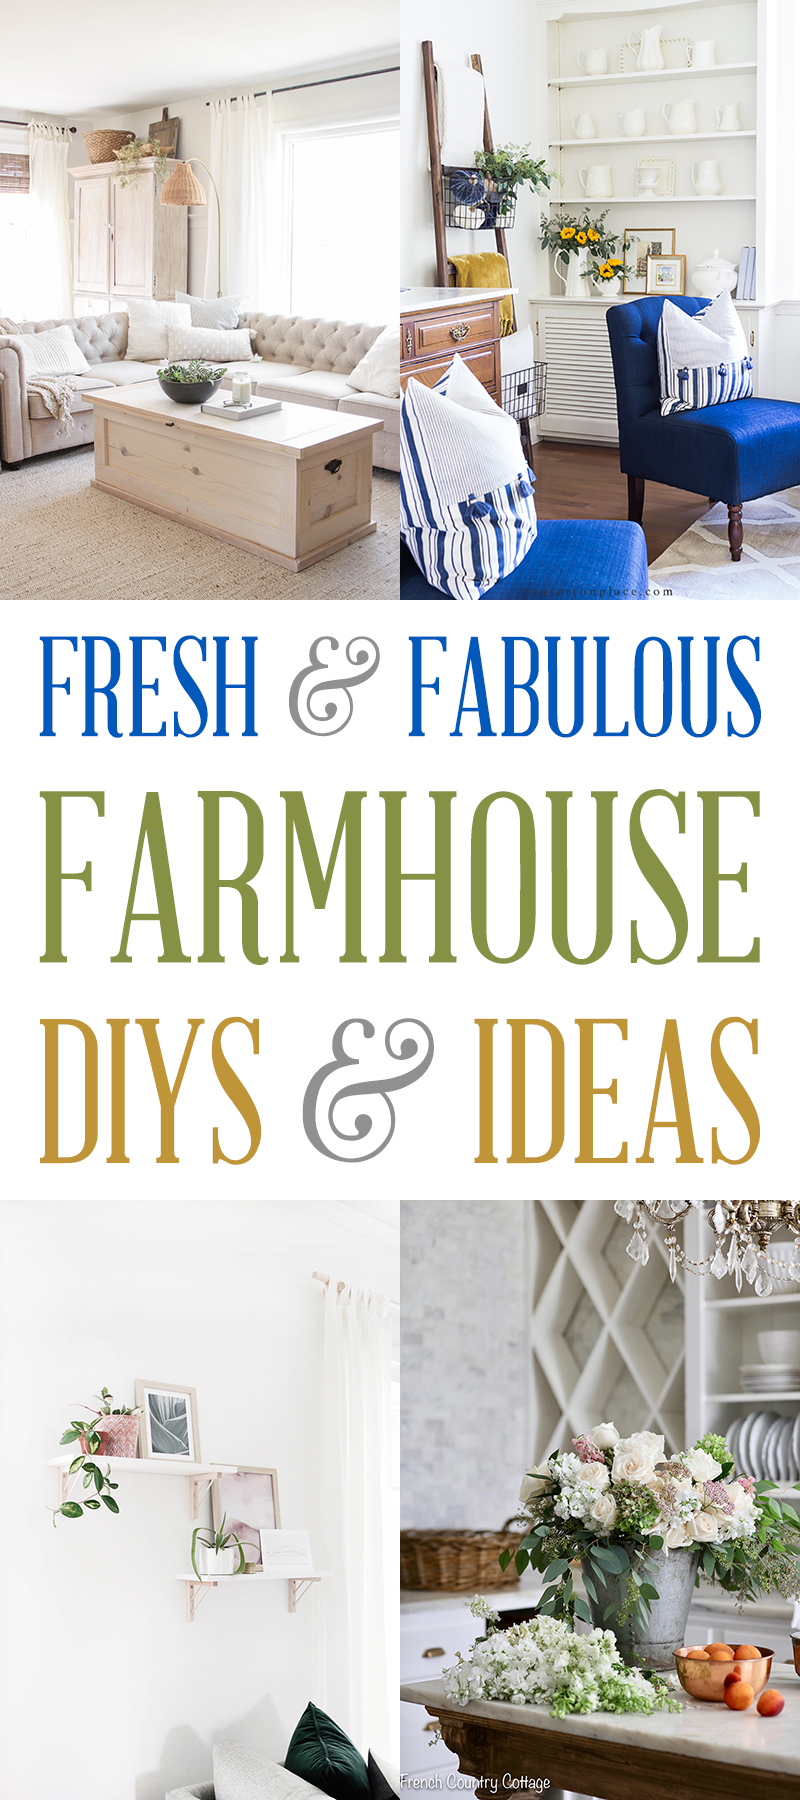 Fabulous and Fresh Farmhouse DIYS And Ideas are waiting to inspire you to create. All the newest happenings in the Farmhouse World all in one place to enjoy!